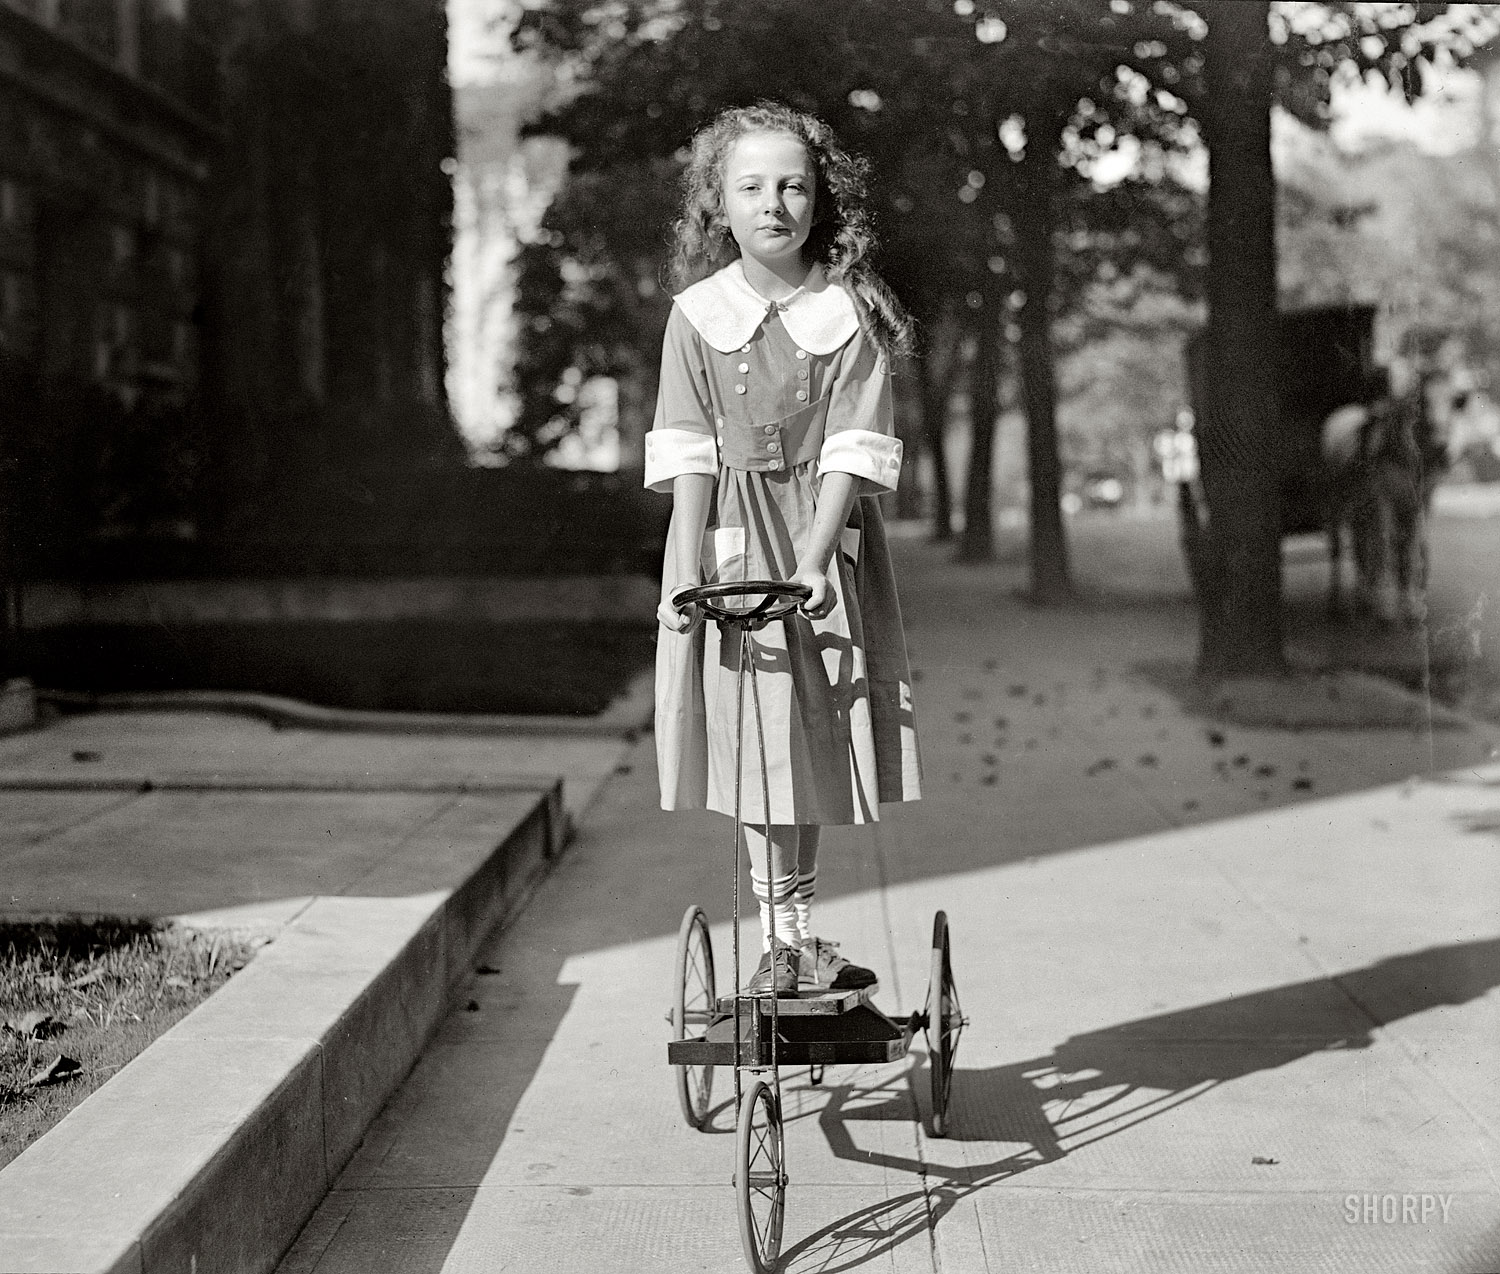 Washington, D.C., circa 1920. "Mary Dixon Palmer." Daughter of the attorney general. National Photo Company Collection glass negative. View full size.